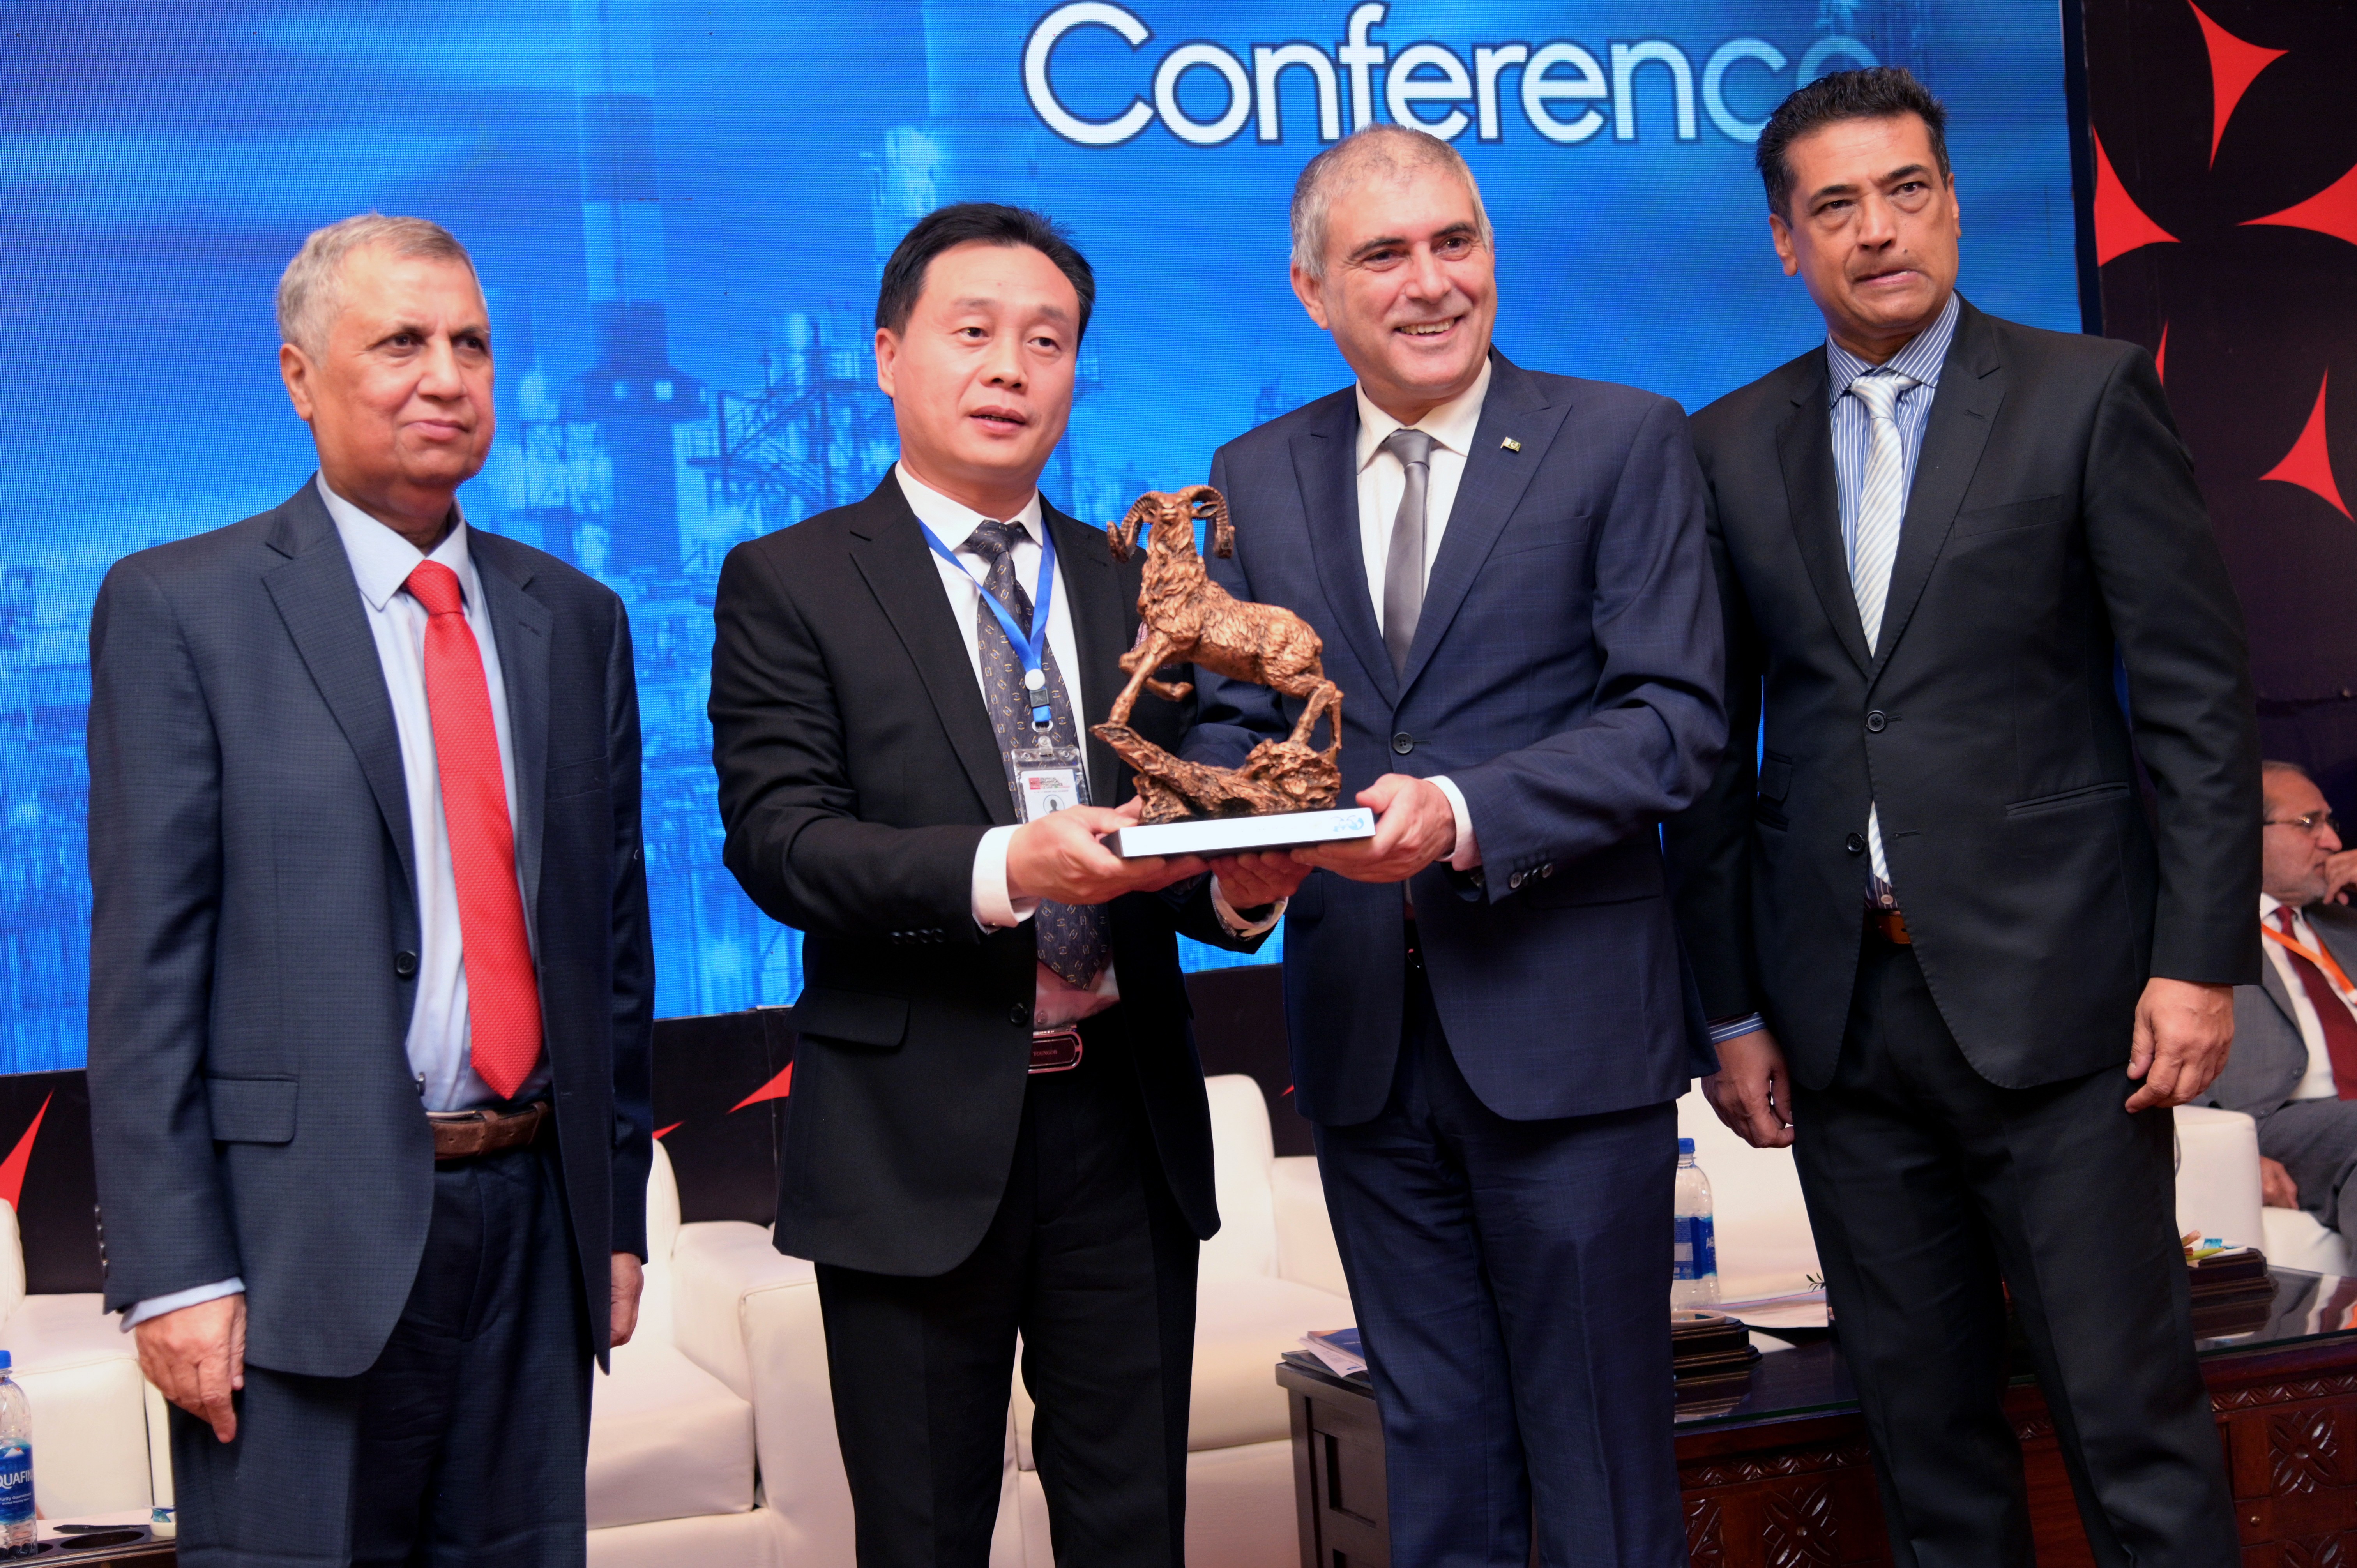 Shields distribution ceremony to the cooperate members at the event of conference and oil show